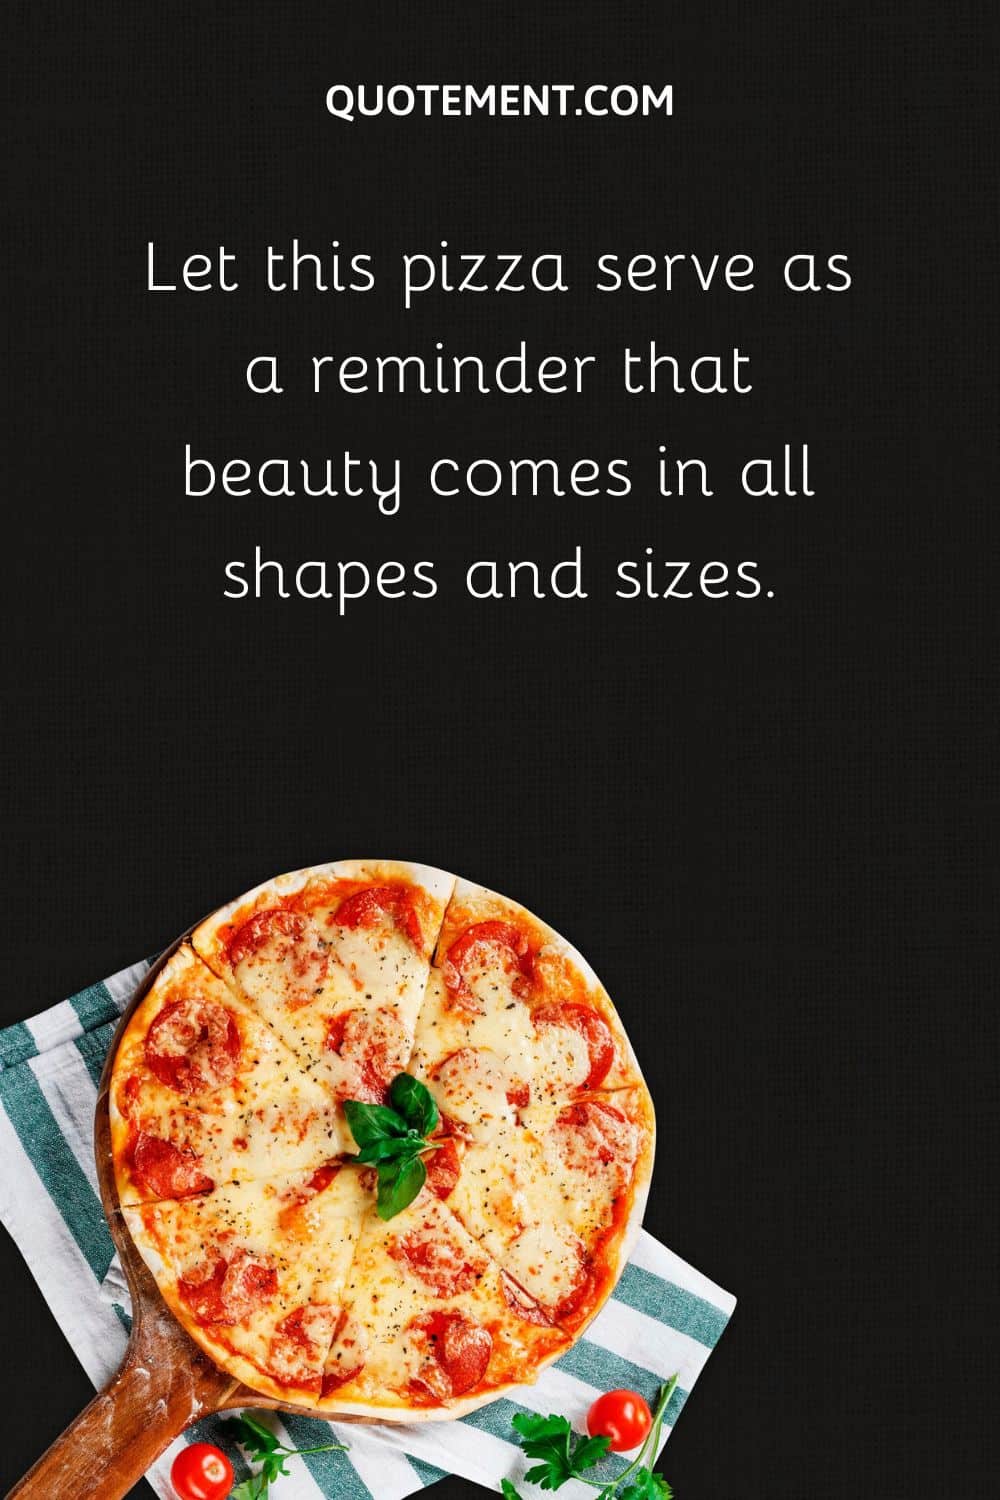 Let this pizza serve as a reminder that beauty comes in all shapes and sizes.